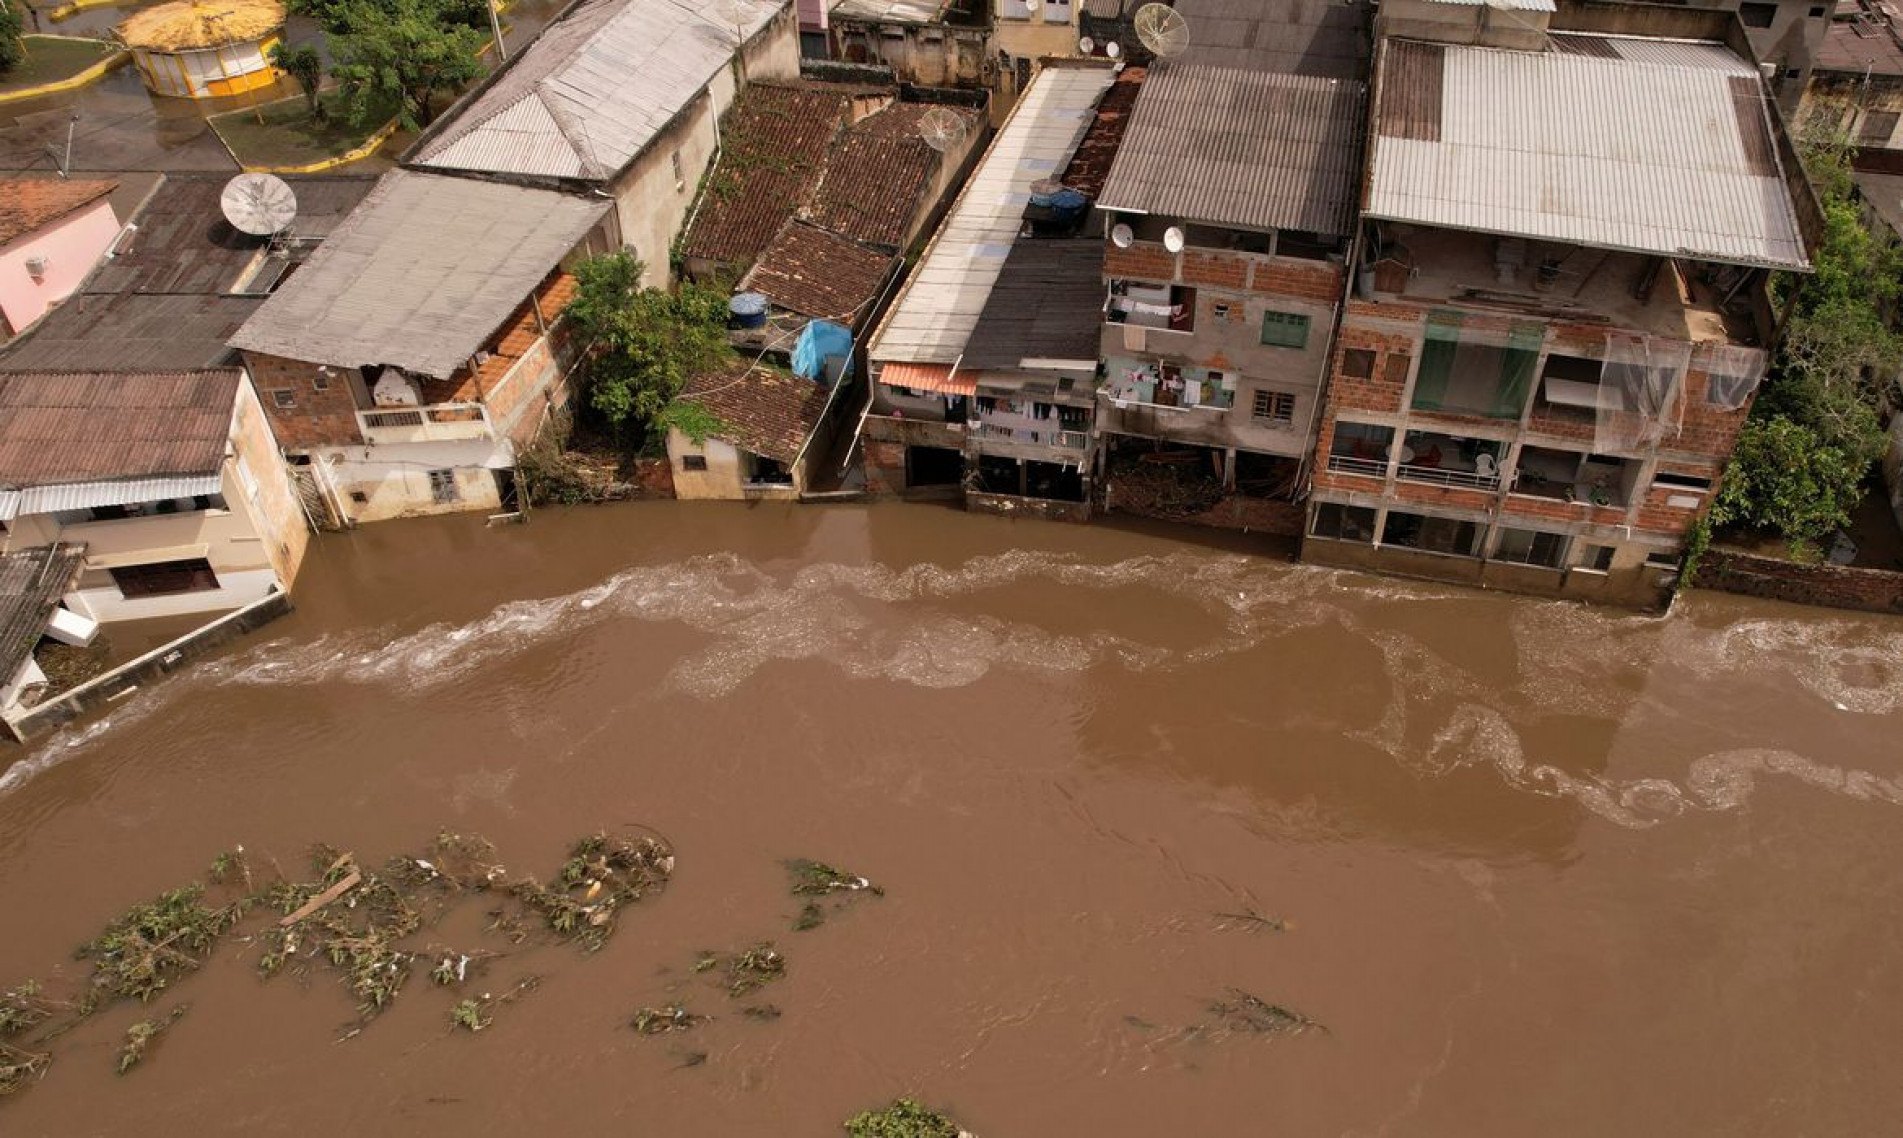  An aerial view shows a flooded street, caused due to heavy rains, in Itajuipe, Bahia state, Brazil December 27, 2021. Picture taken with a drone. REUTERS/Amanda Perobelli.
    